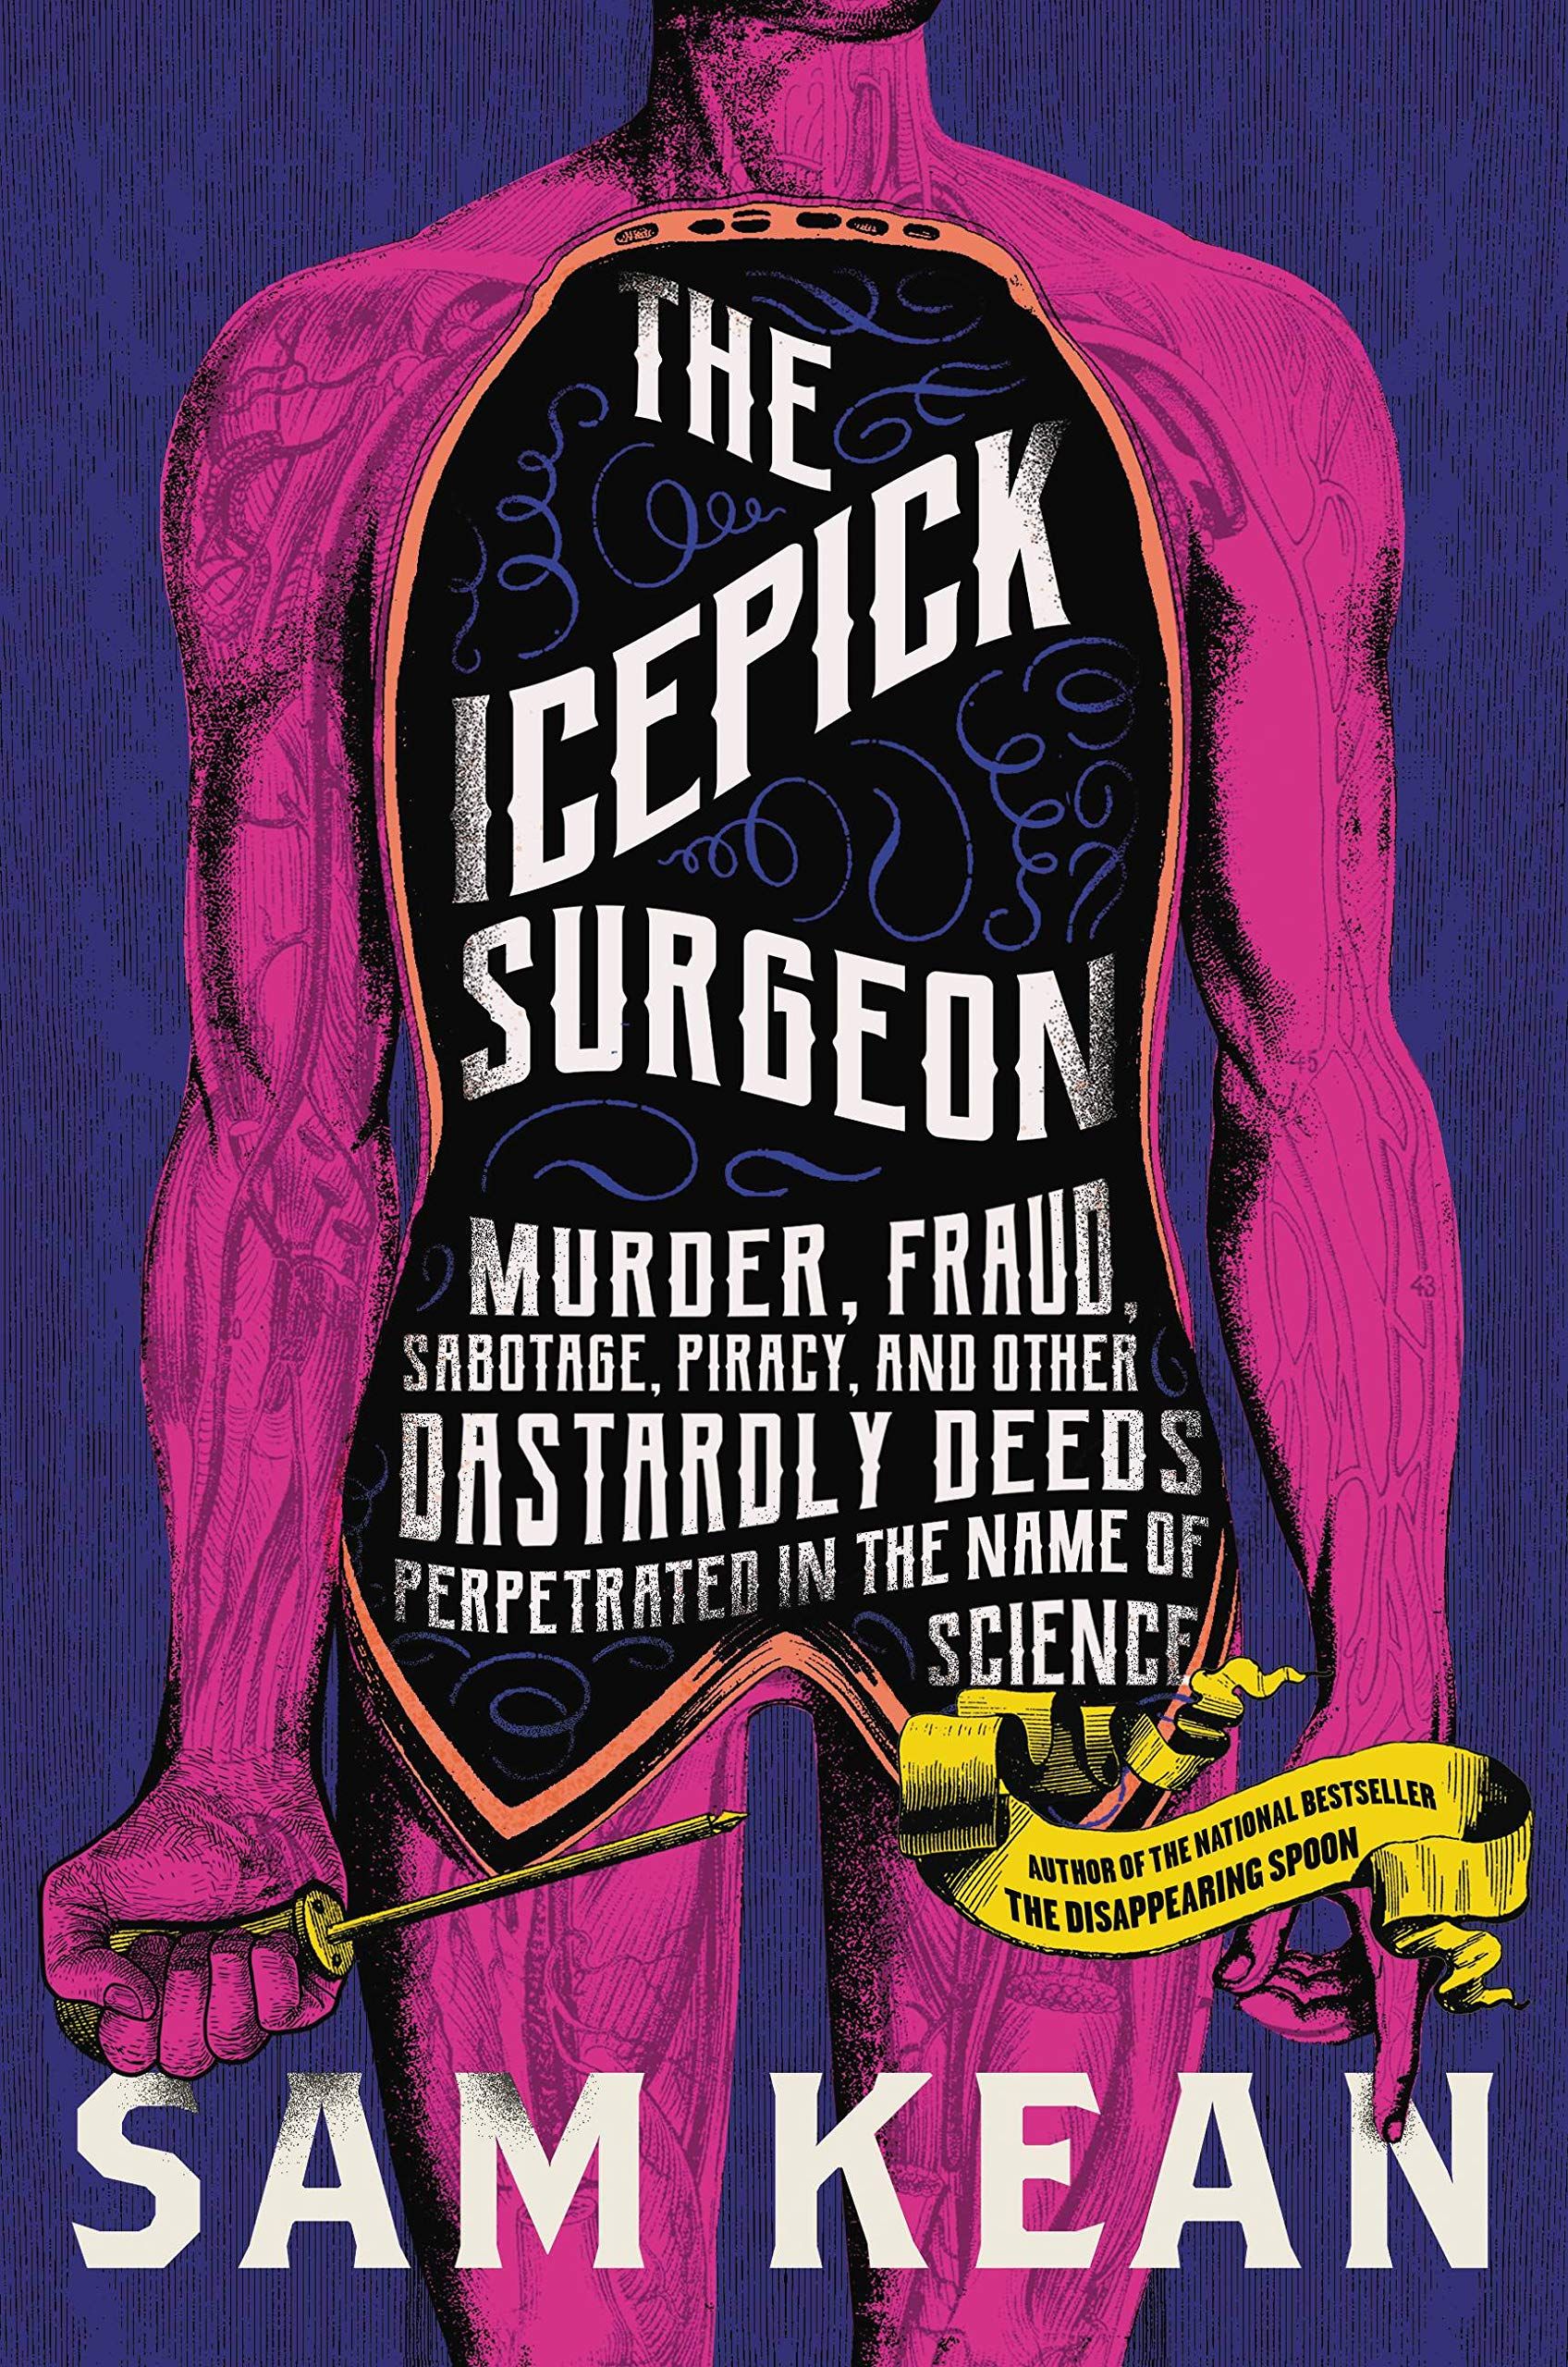 Book cover for The Icepick Surgeon